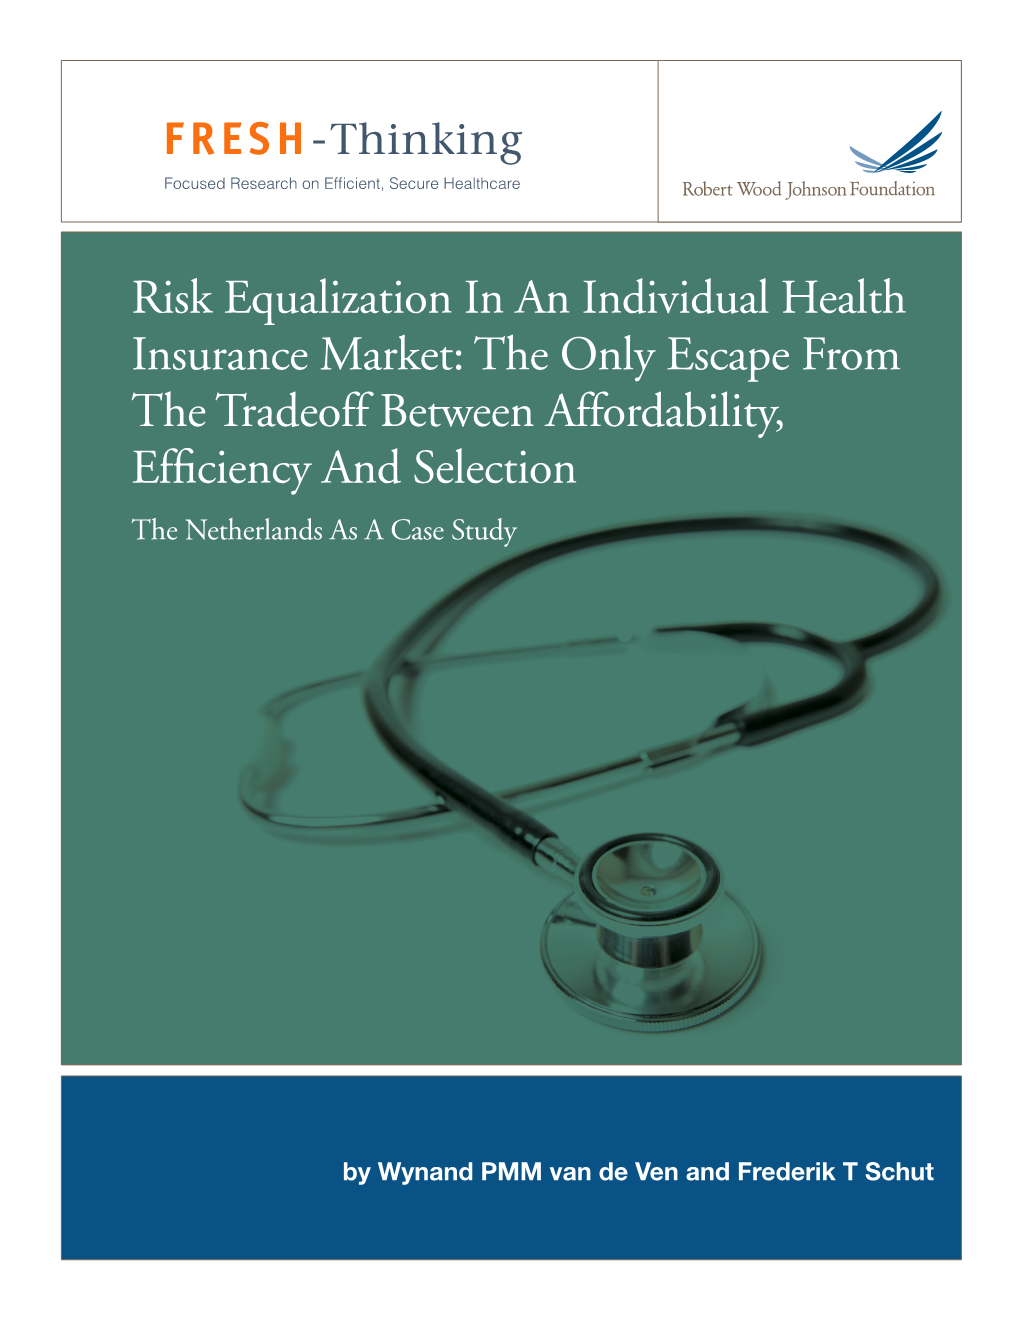 Risk Equalization in an Individual Health Insurance